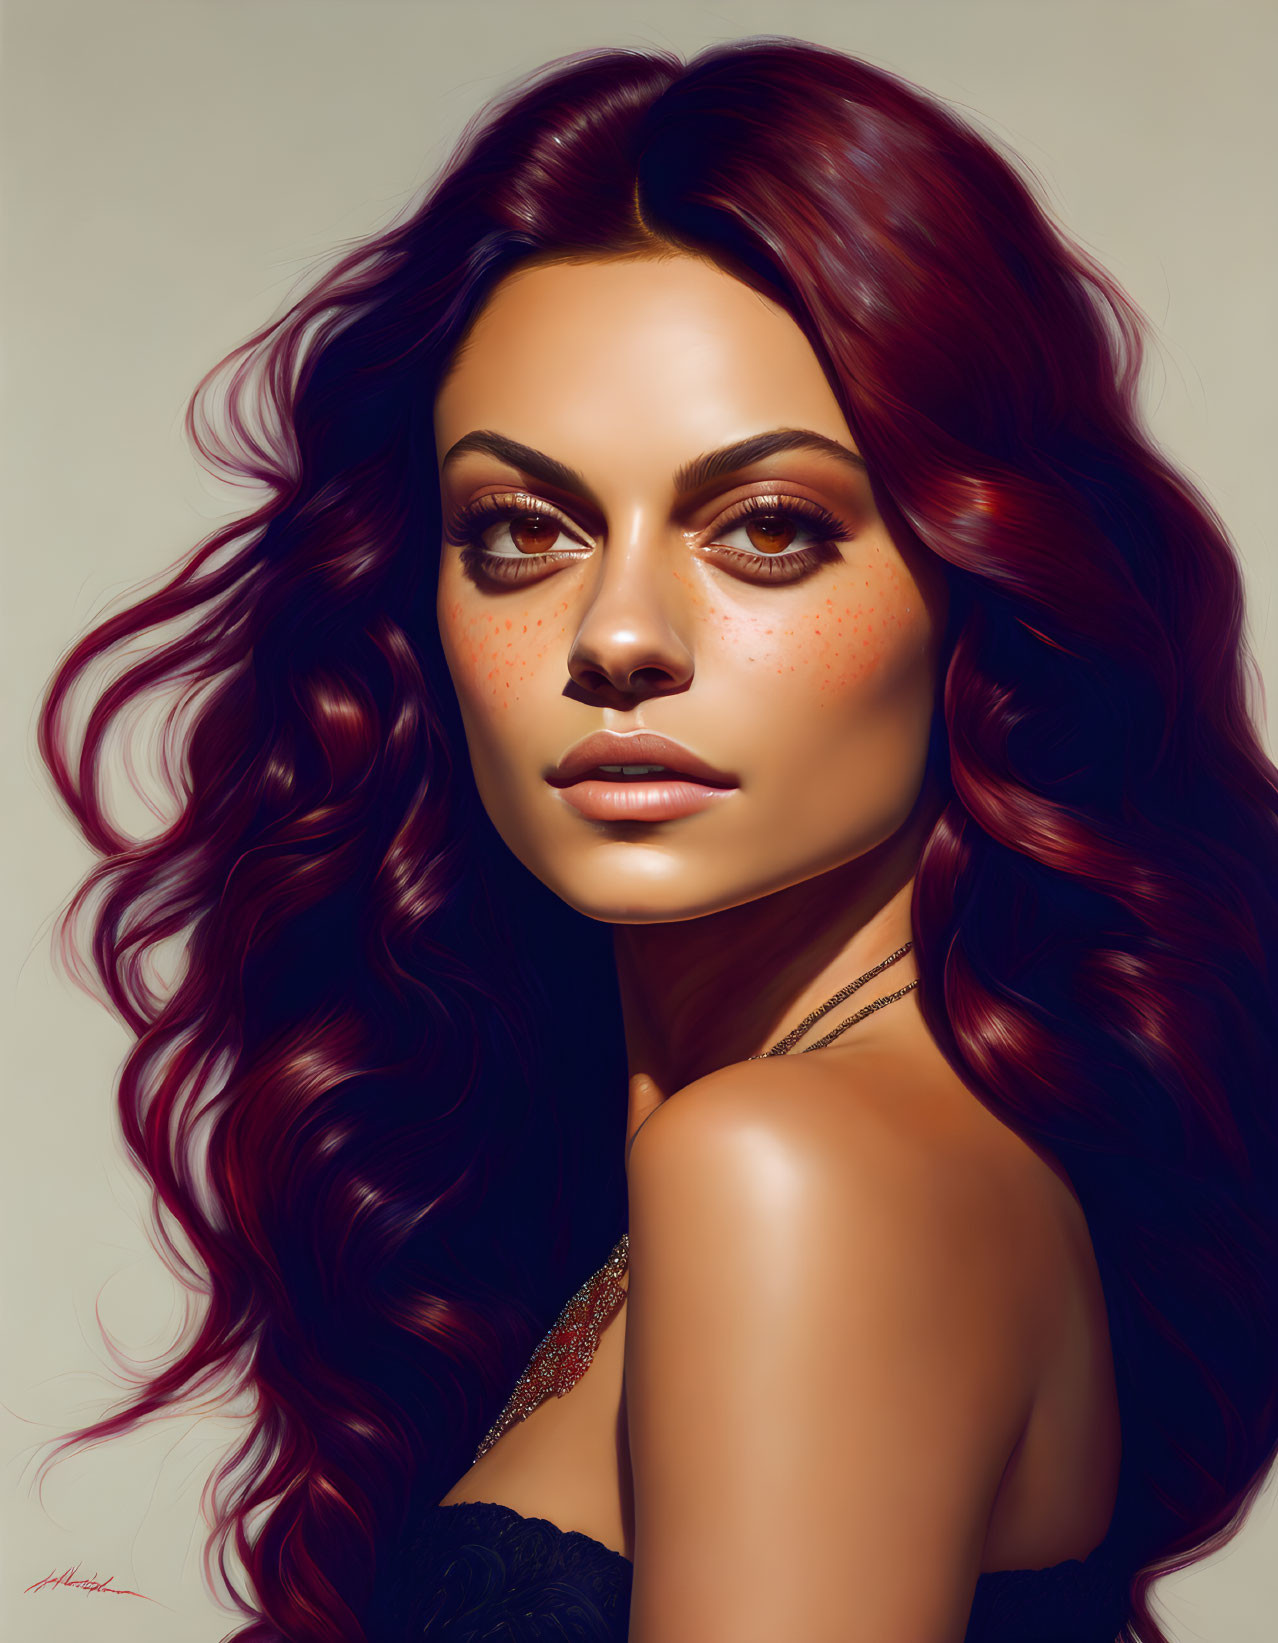 Portrait of Mila Kunis with Red Hair and Freckles